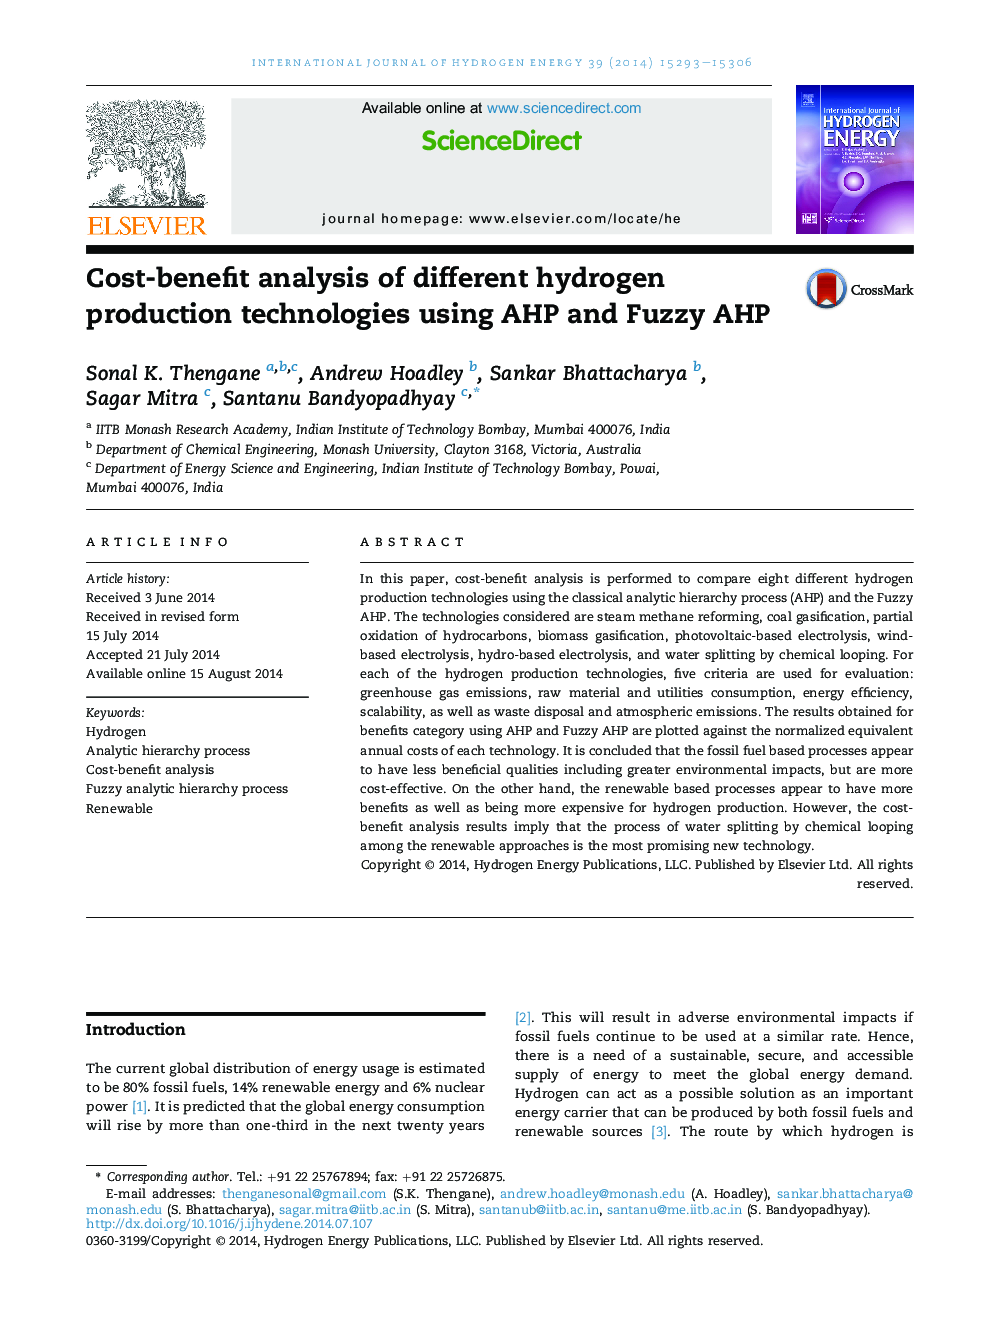 Cost-benefit analysis of different hydrogen production technologies using AHP and Fuzzy AHP